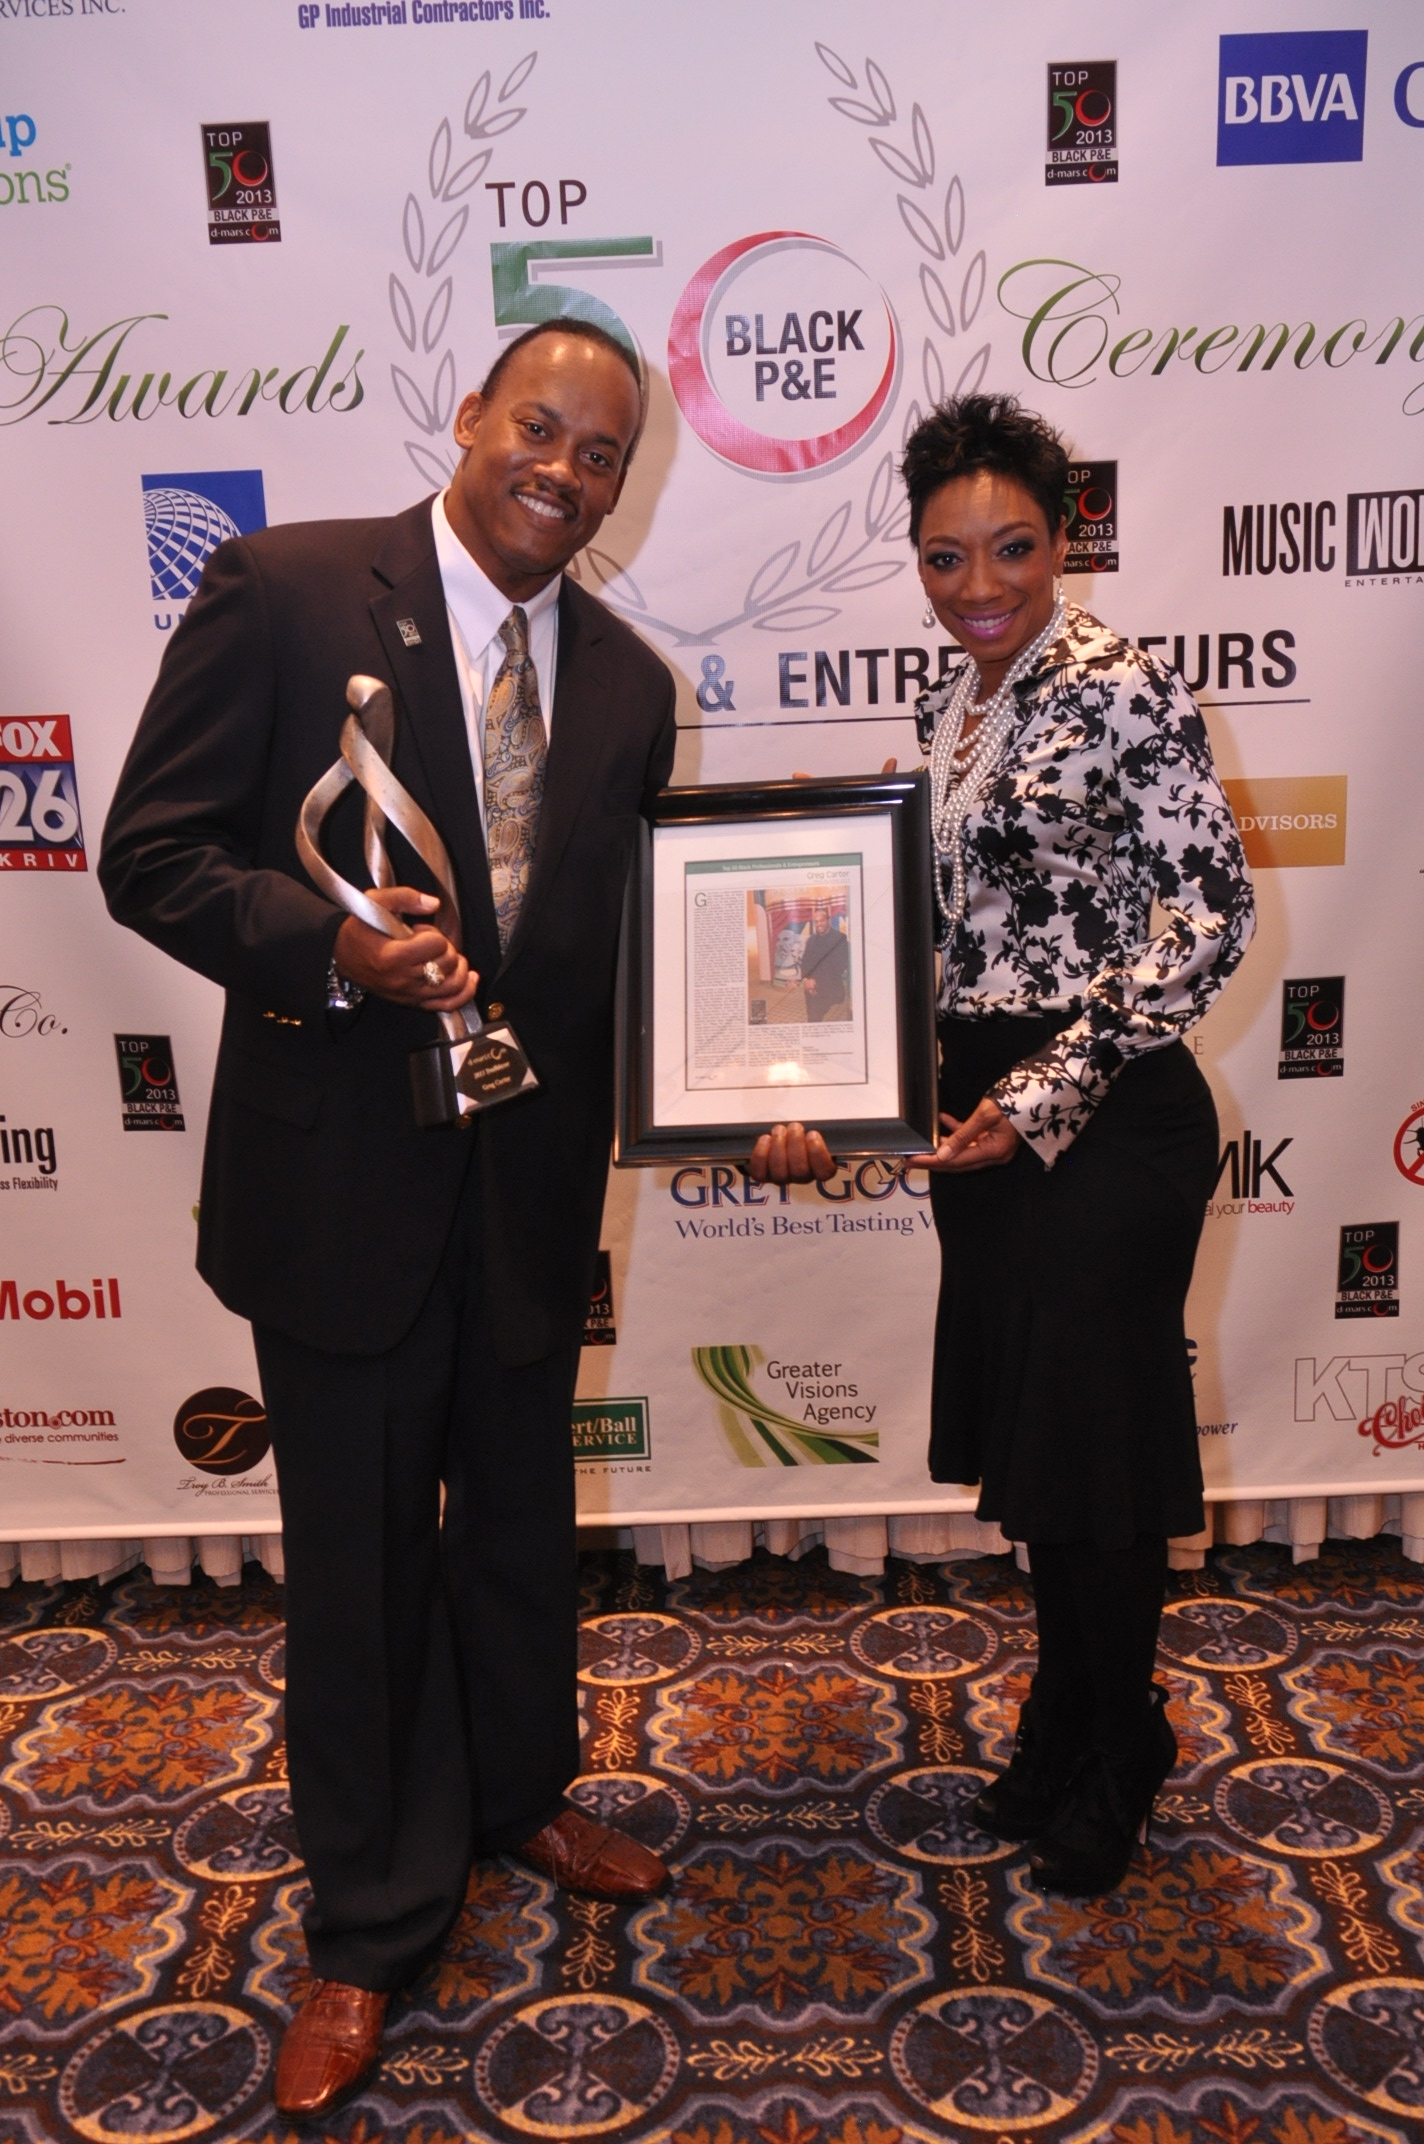 Filmmaker Greg Carter with Actress/Attorney Jalene M. Mack at the Top 50 Black Professional & Entrepreneurs Award Show in Houston, Texas.